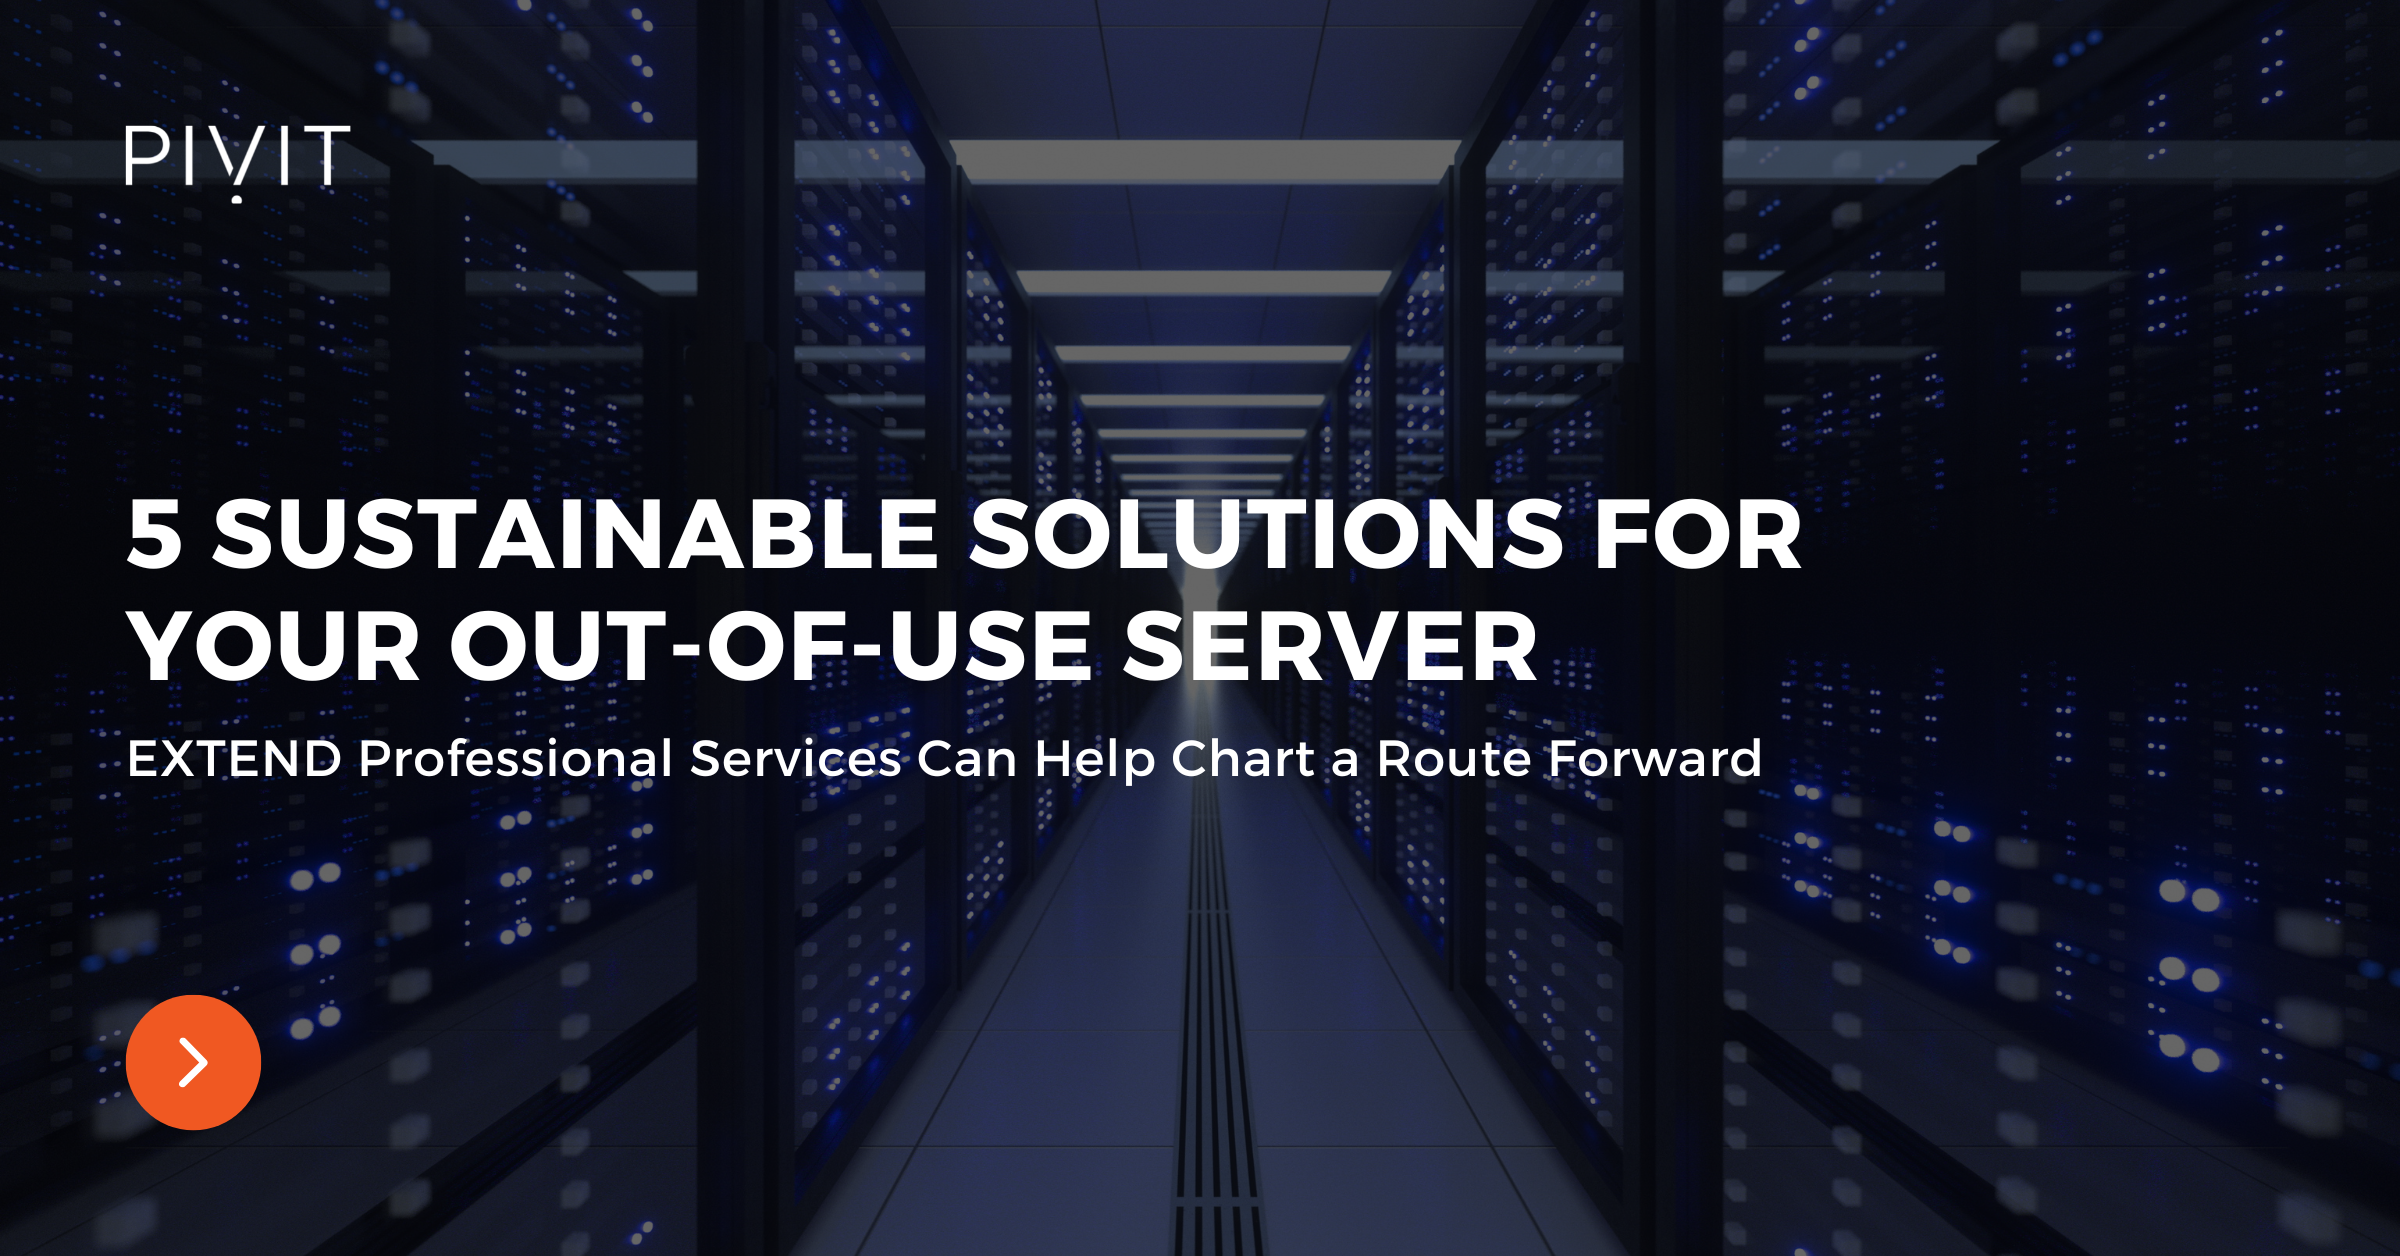 5 Sustainable Solutions for Your Out-of-Use Server